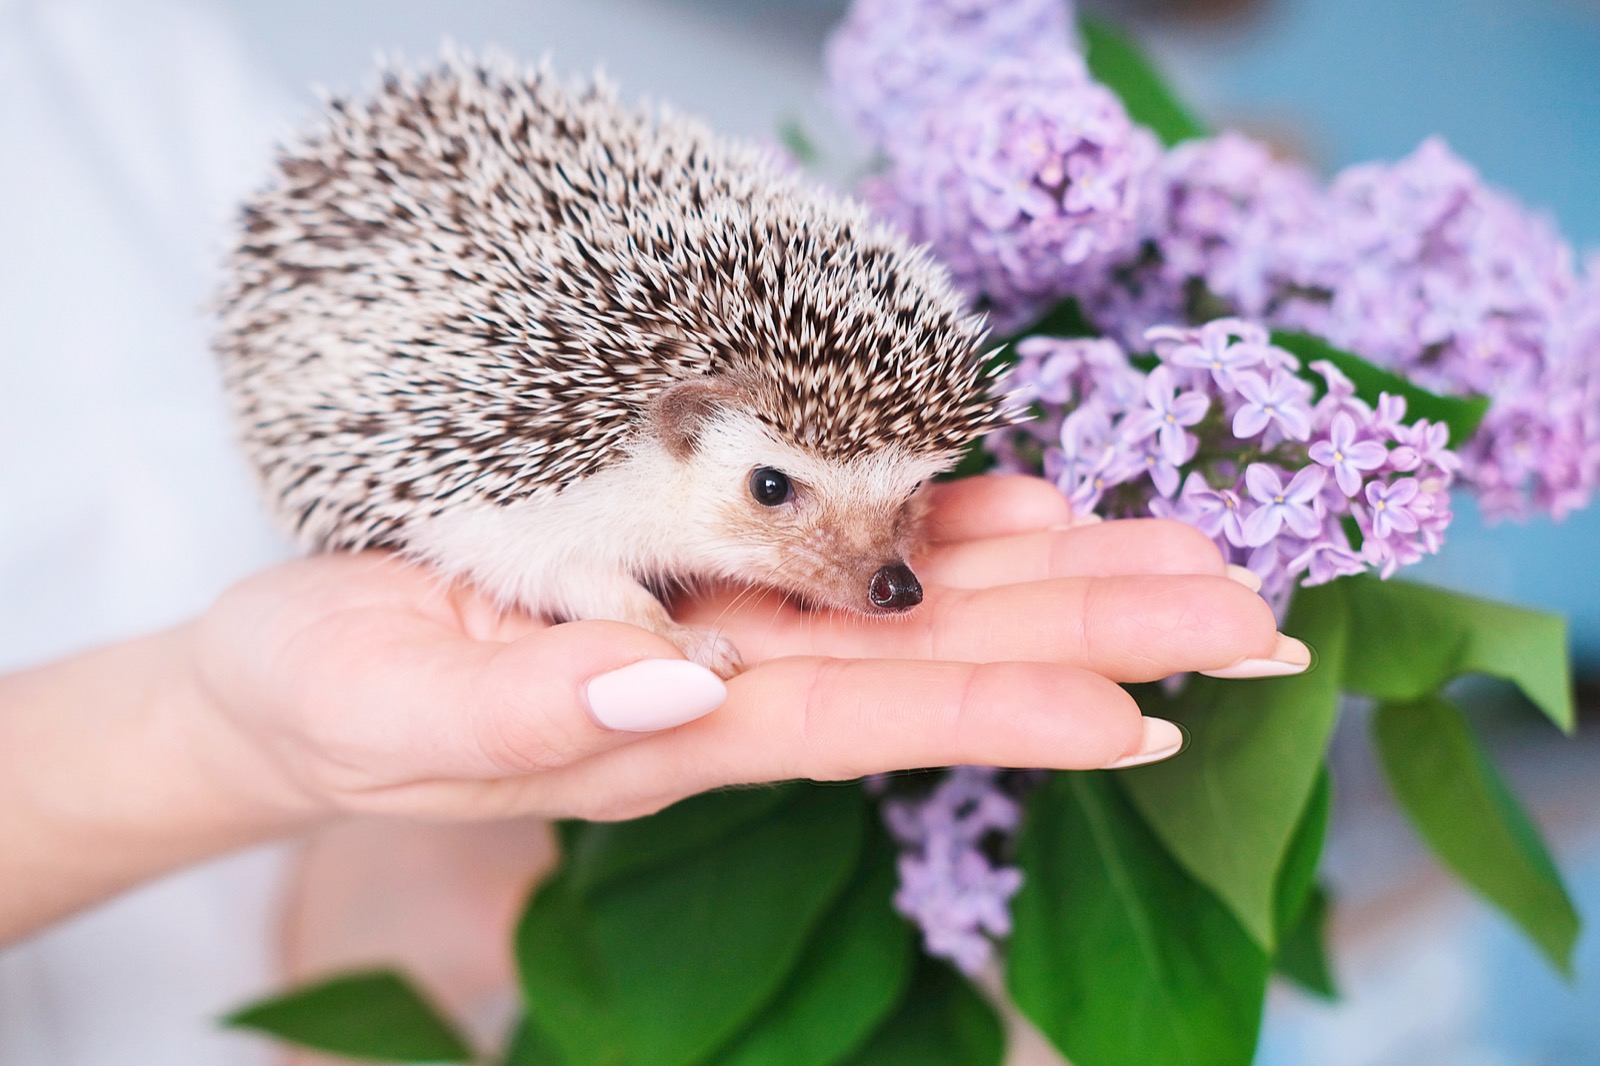 This Animal Quiz Might Not Be Hardest 1 You've Ever Taken, But It Certainly Isn't Easy hedgehog